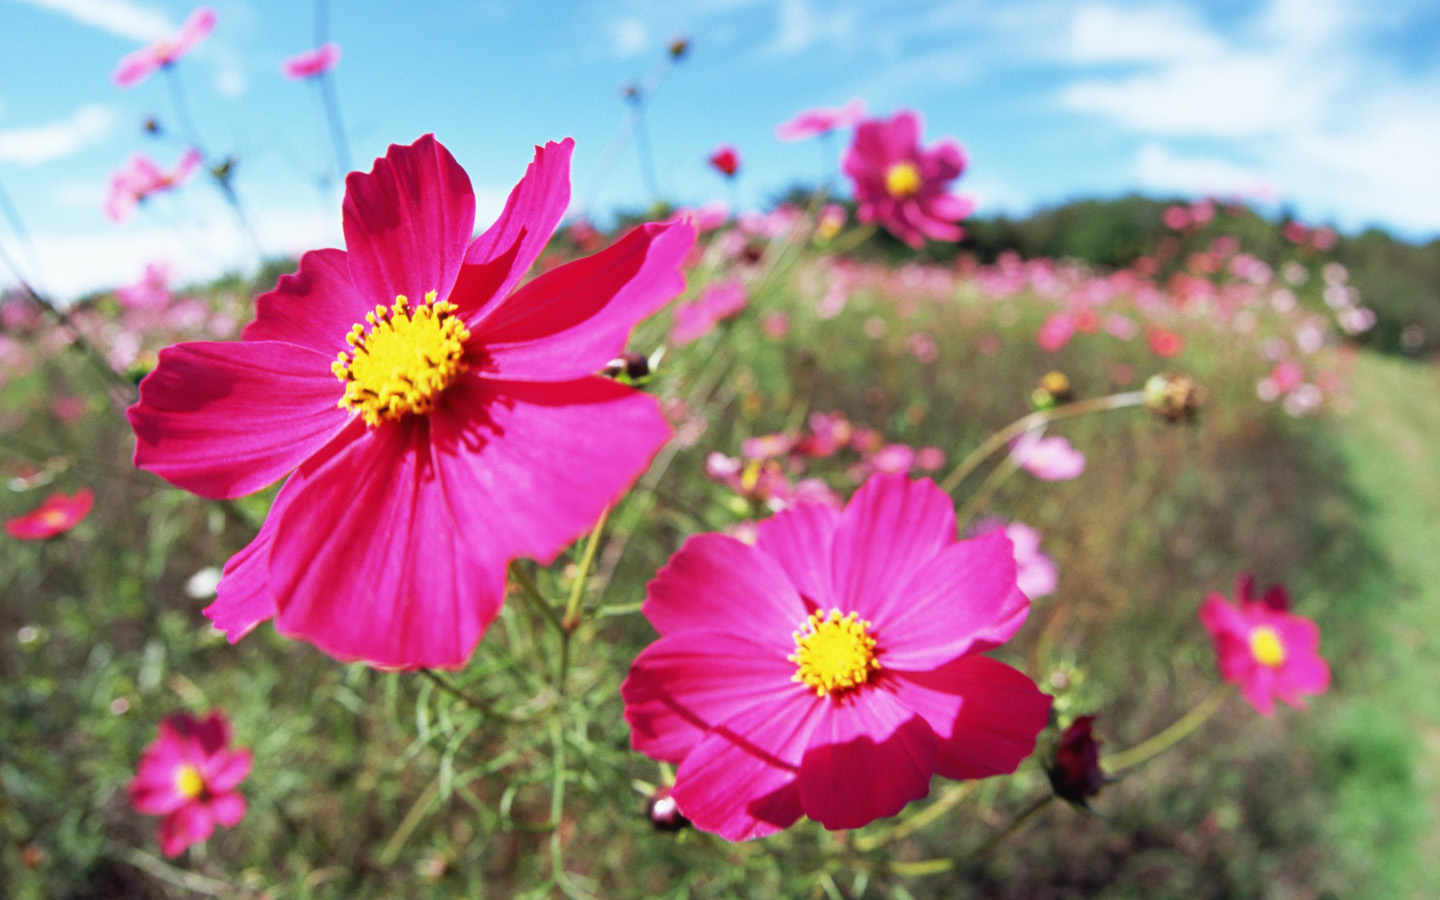 HD Wallpapers 6 Cosmos close-up photo - Cosmos Flowers photps